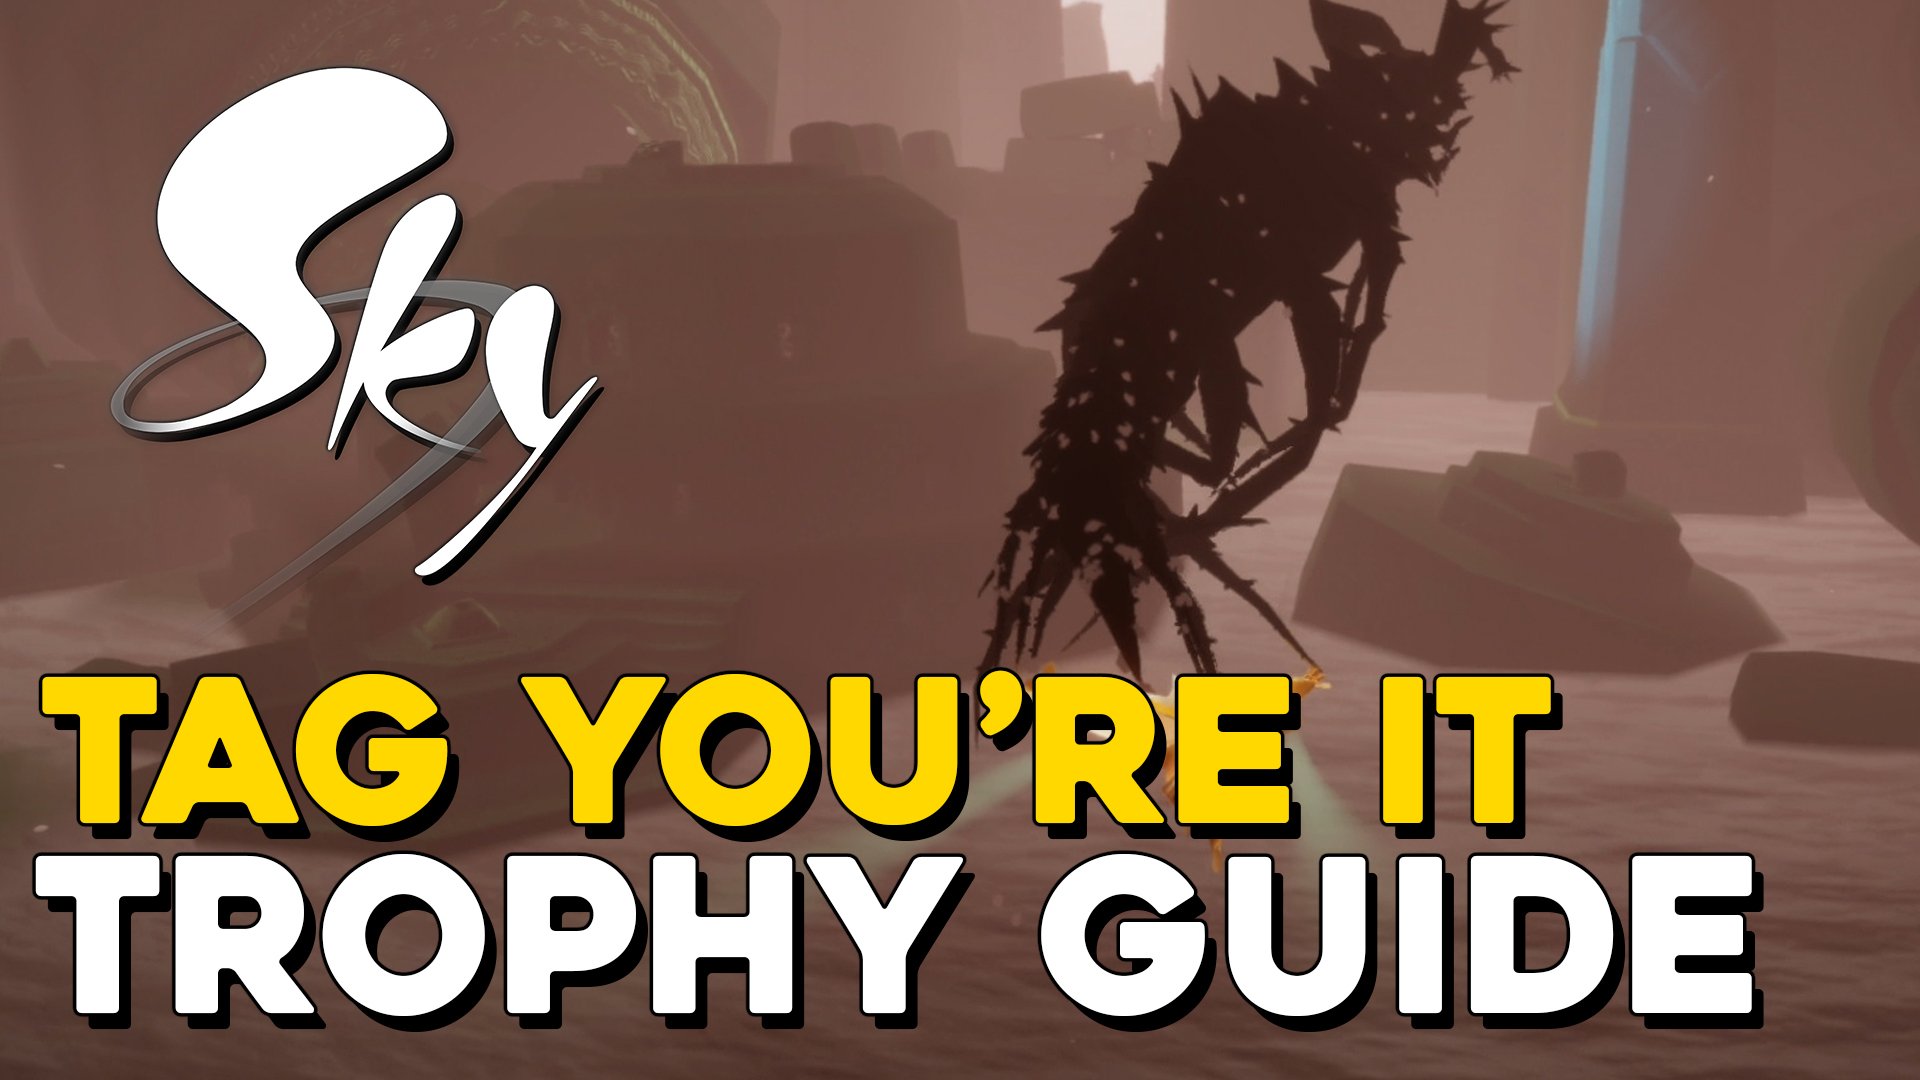 Sky Children Of The Light Tag You're It Trophy Guide.jpg